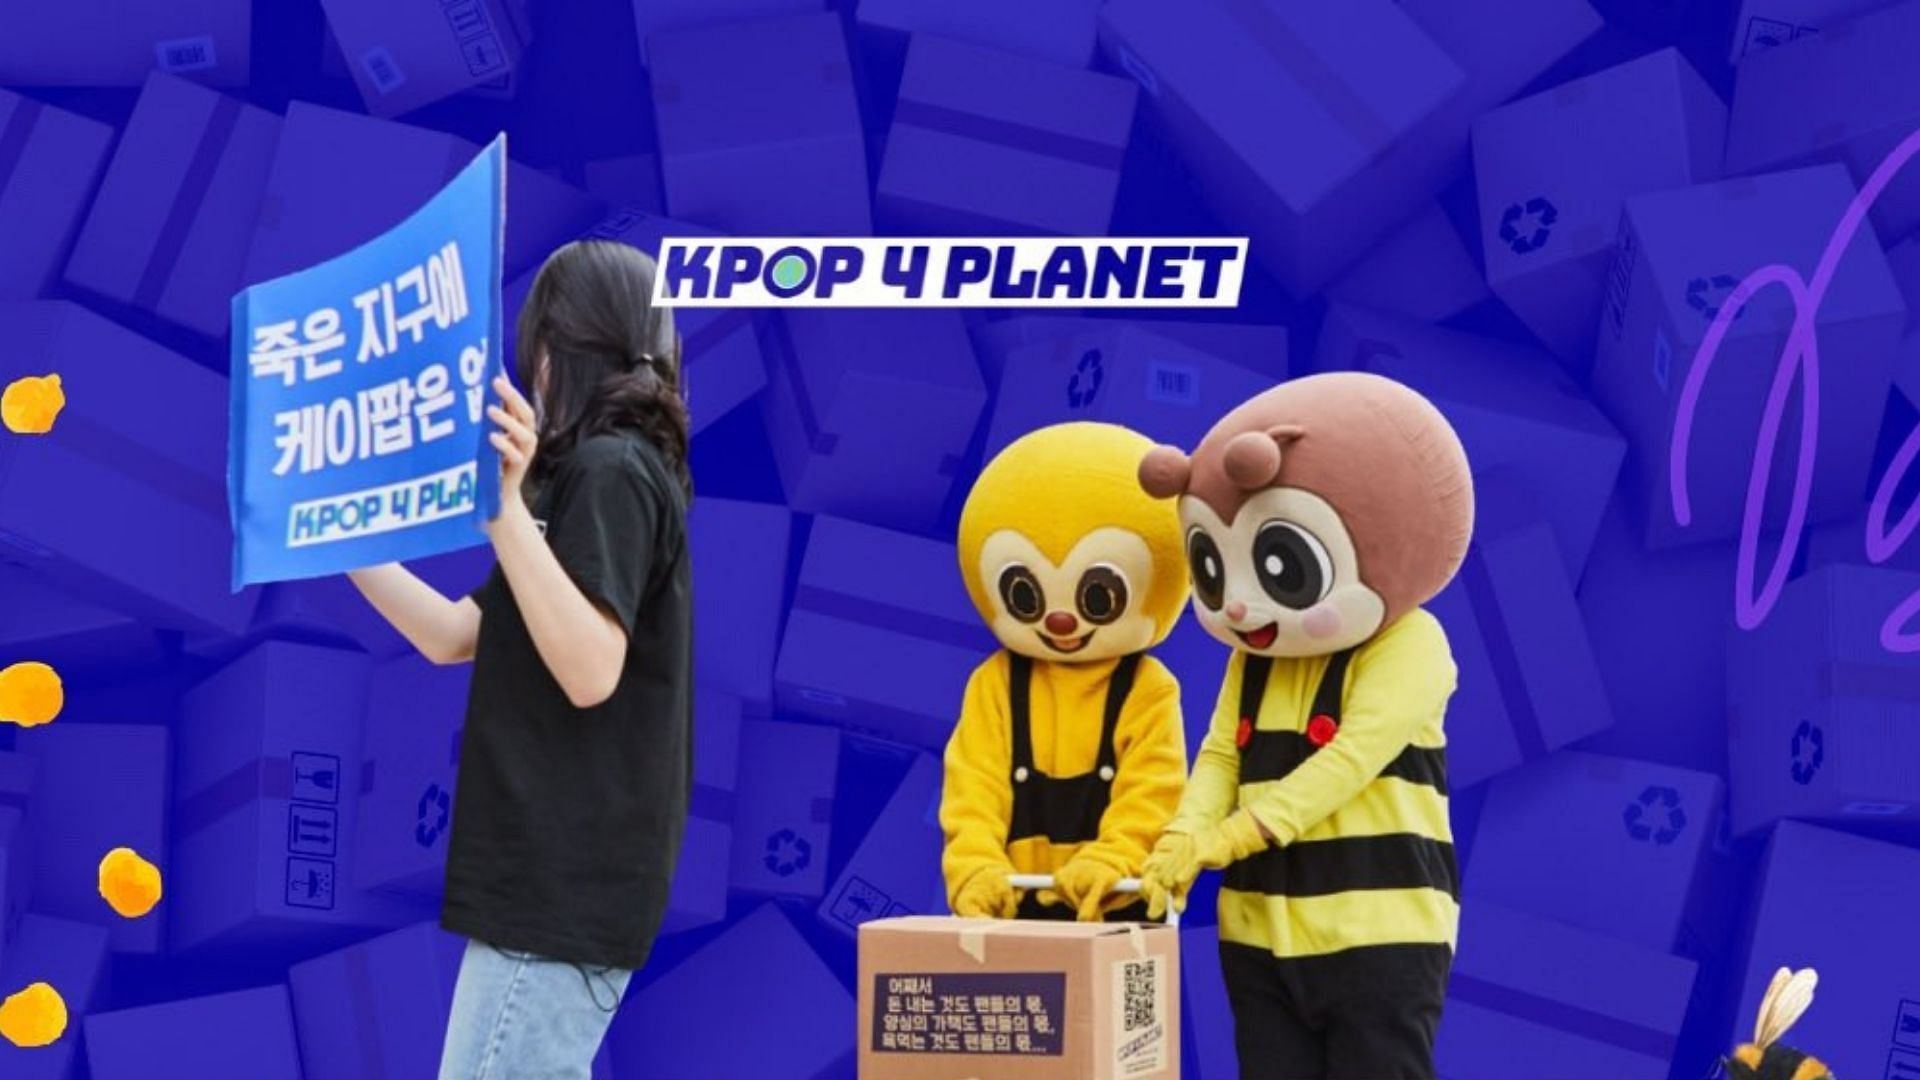 KPOP 4 PLANET in action for their Earth Day campaign (Image via @kpop4planet/Twitter)